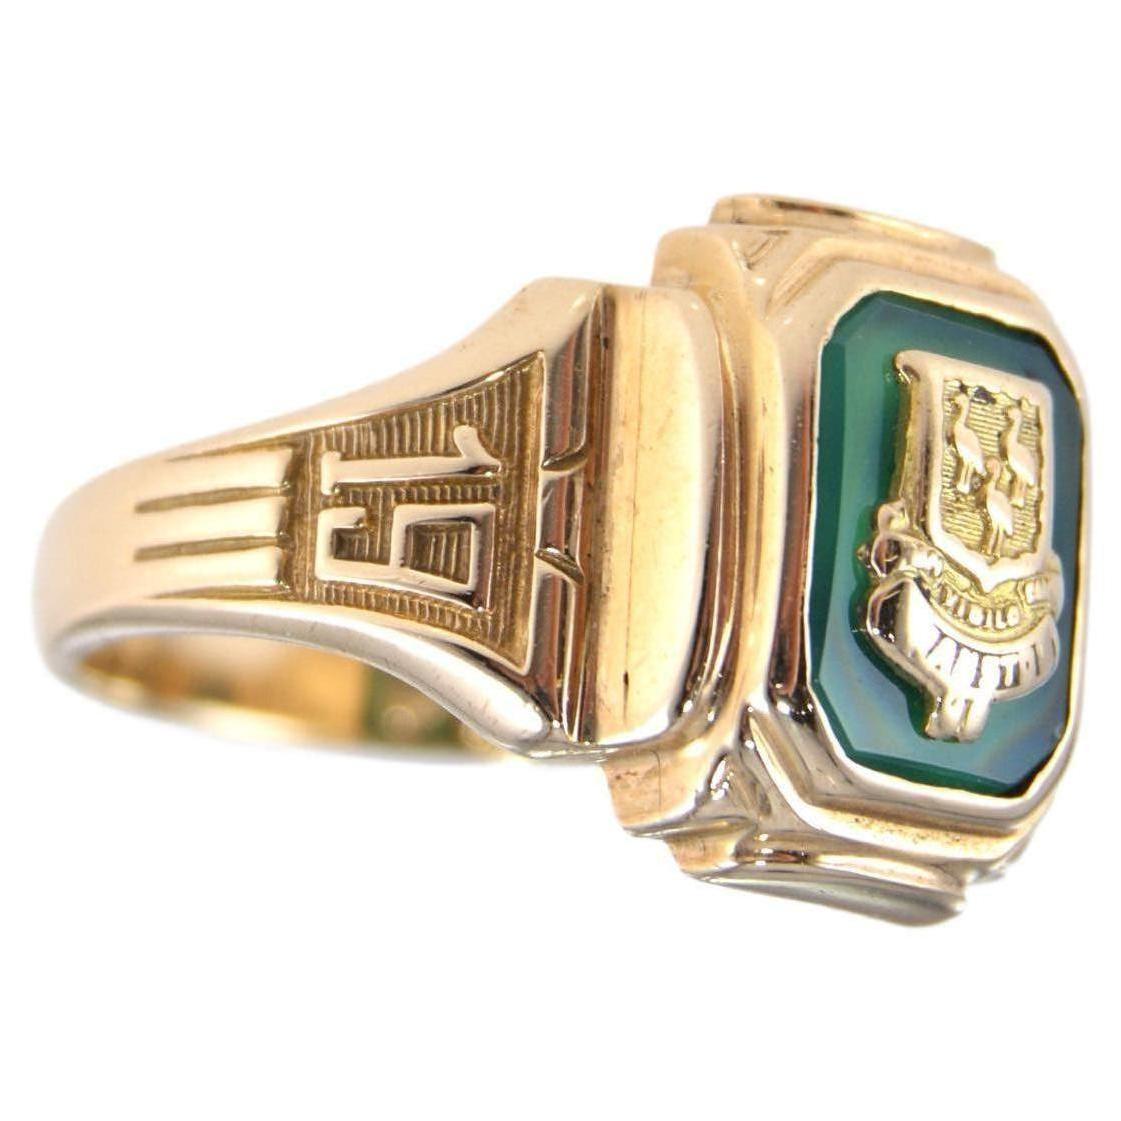 Unisex Art Deco Signet Ring in 10 Karat Solid Gold with Gold Inset from 1953 For Sale 1